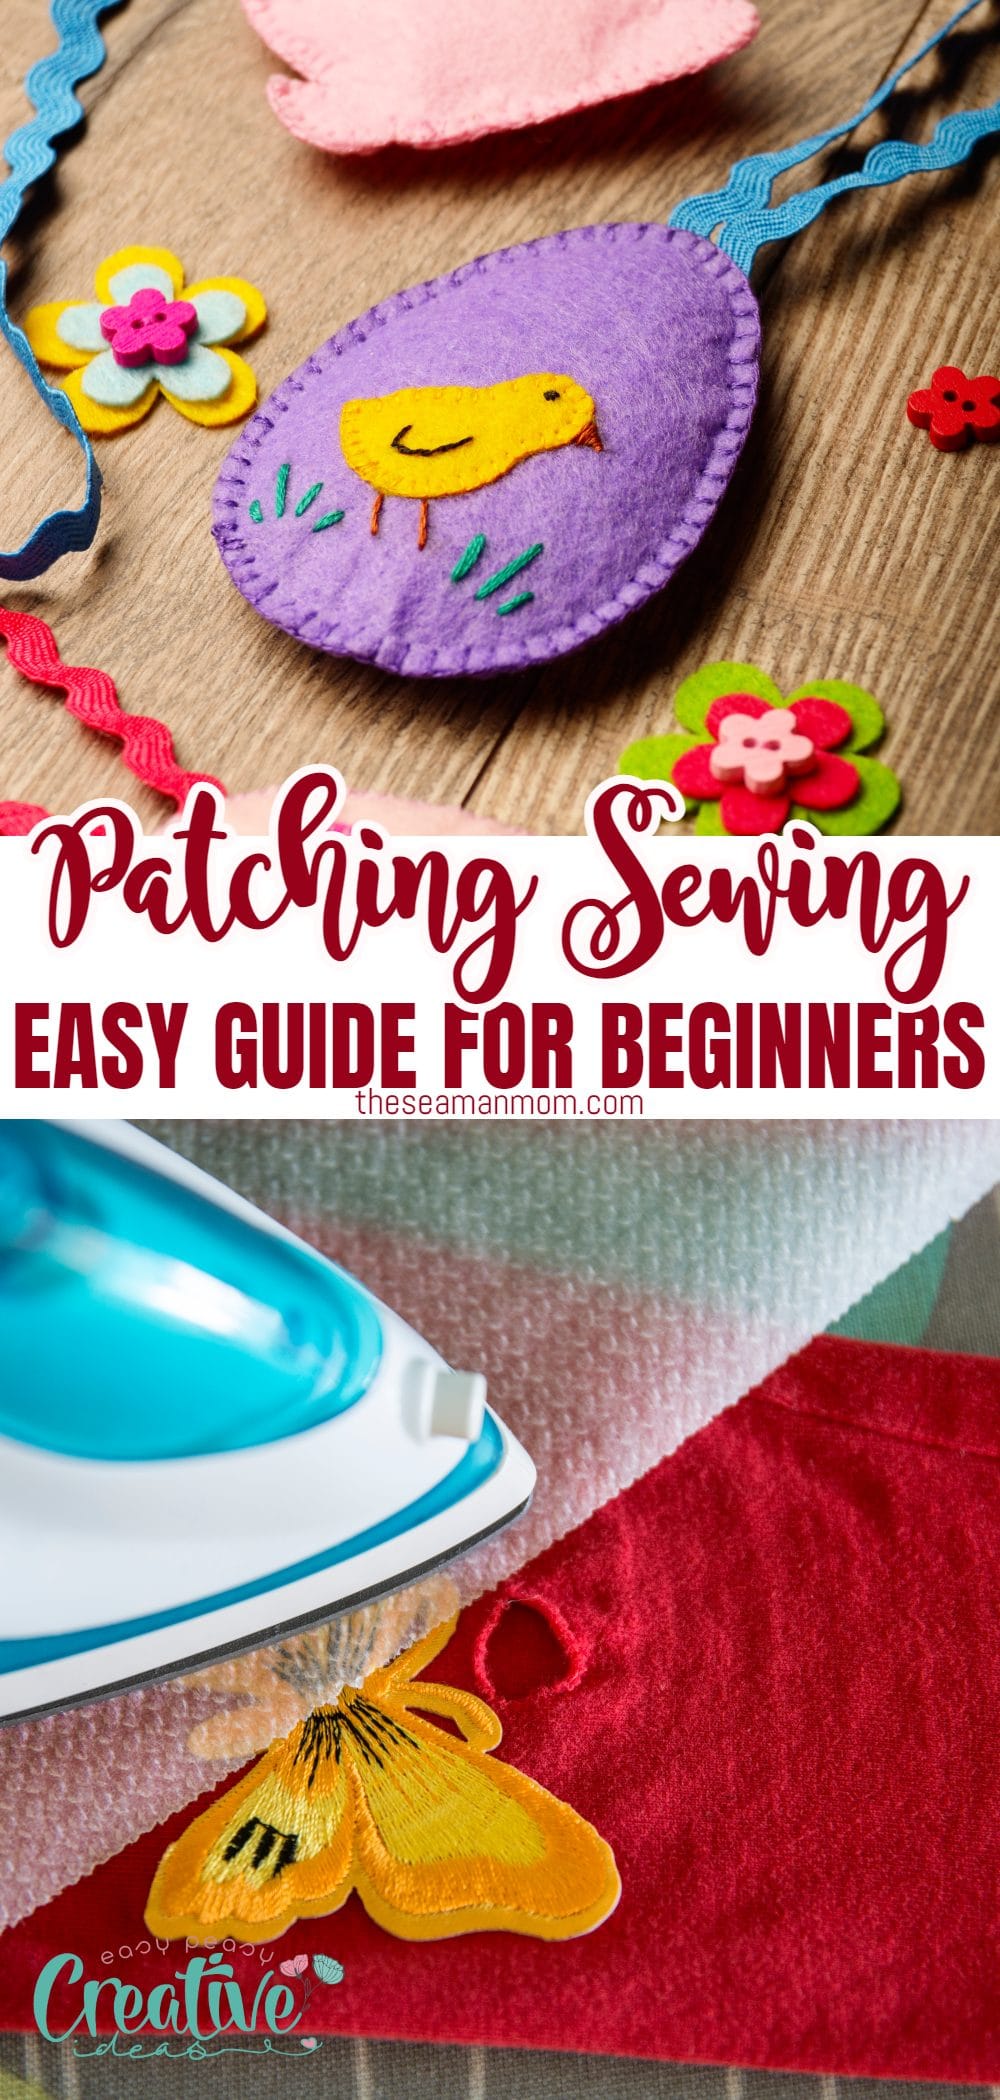 Are you looking for a way to patch up your clothes without spending a lot of money? Patching sewing  is a great way to extend the life of your clothing and give them a unique look. In this tutorial, I'll show you how to sew a patch onto your clothes using a few simple supplies. Keep reading to learn more! via @petroneagu